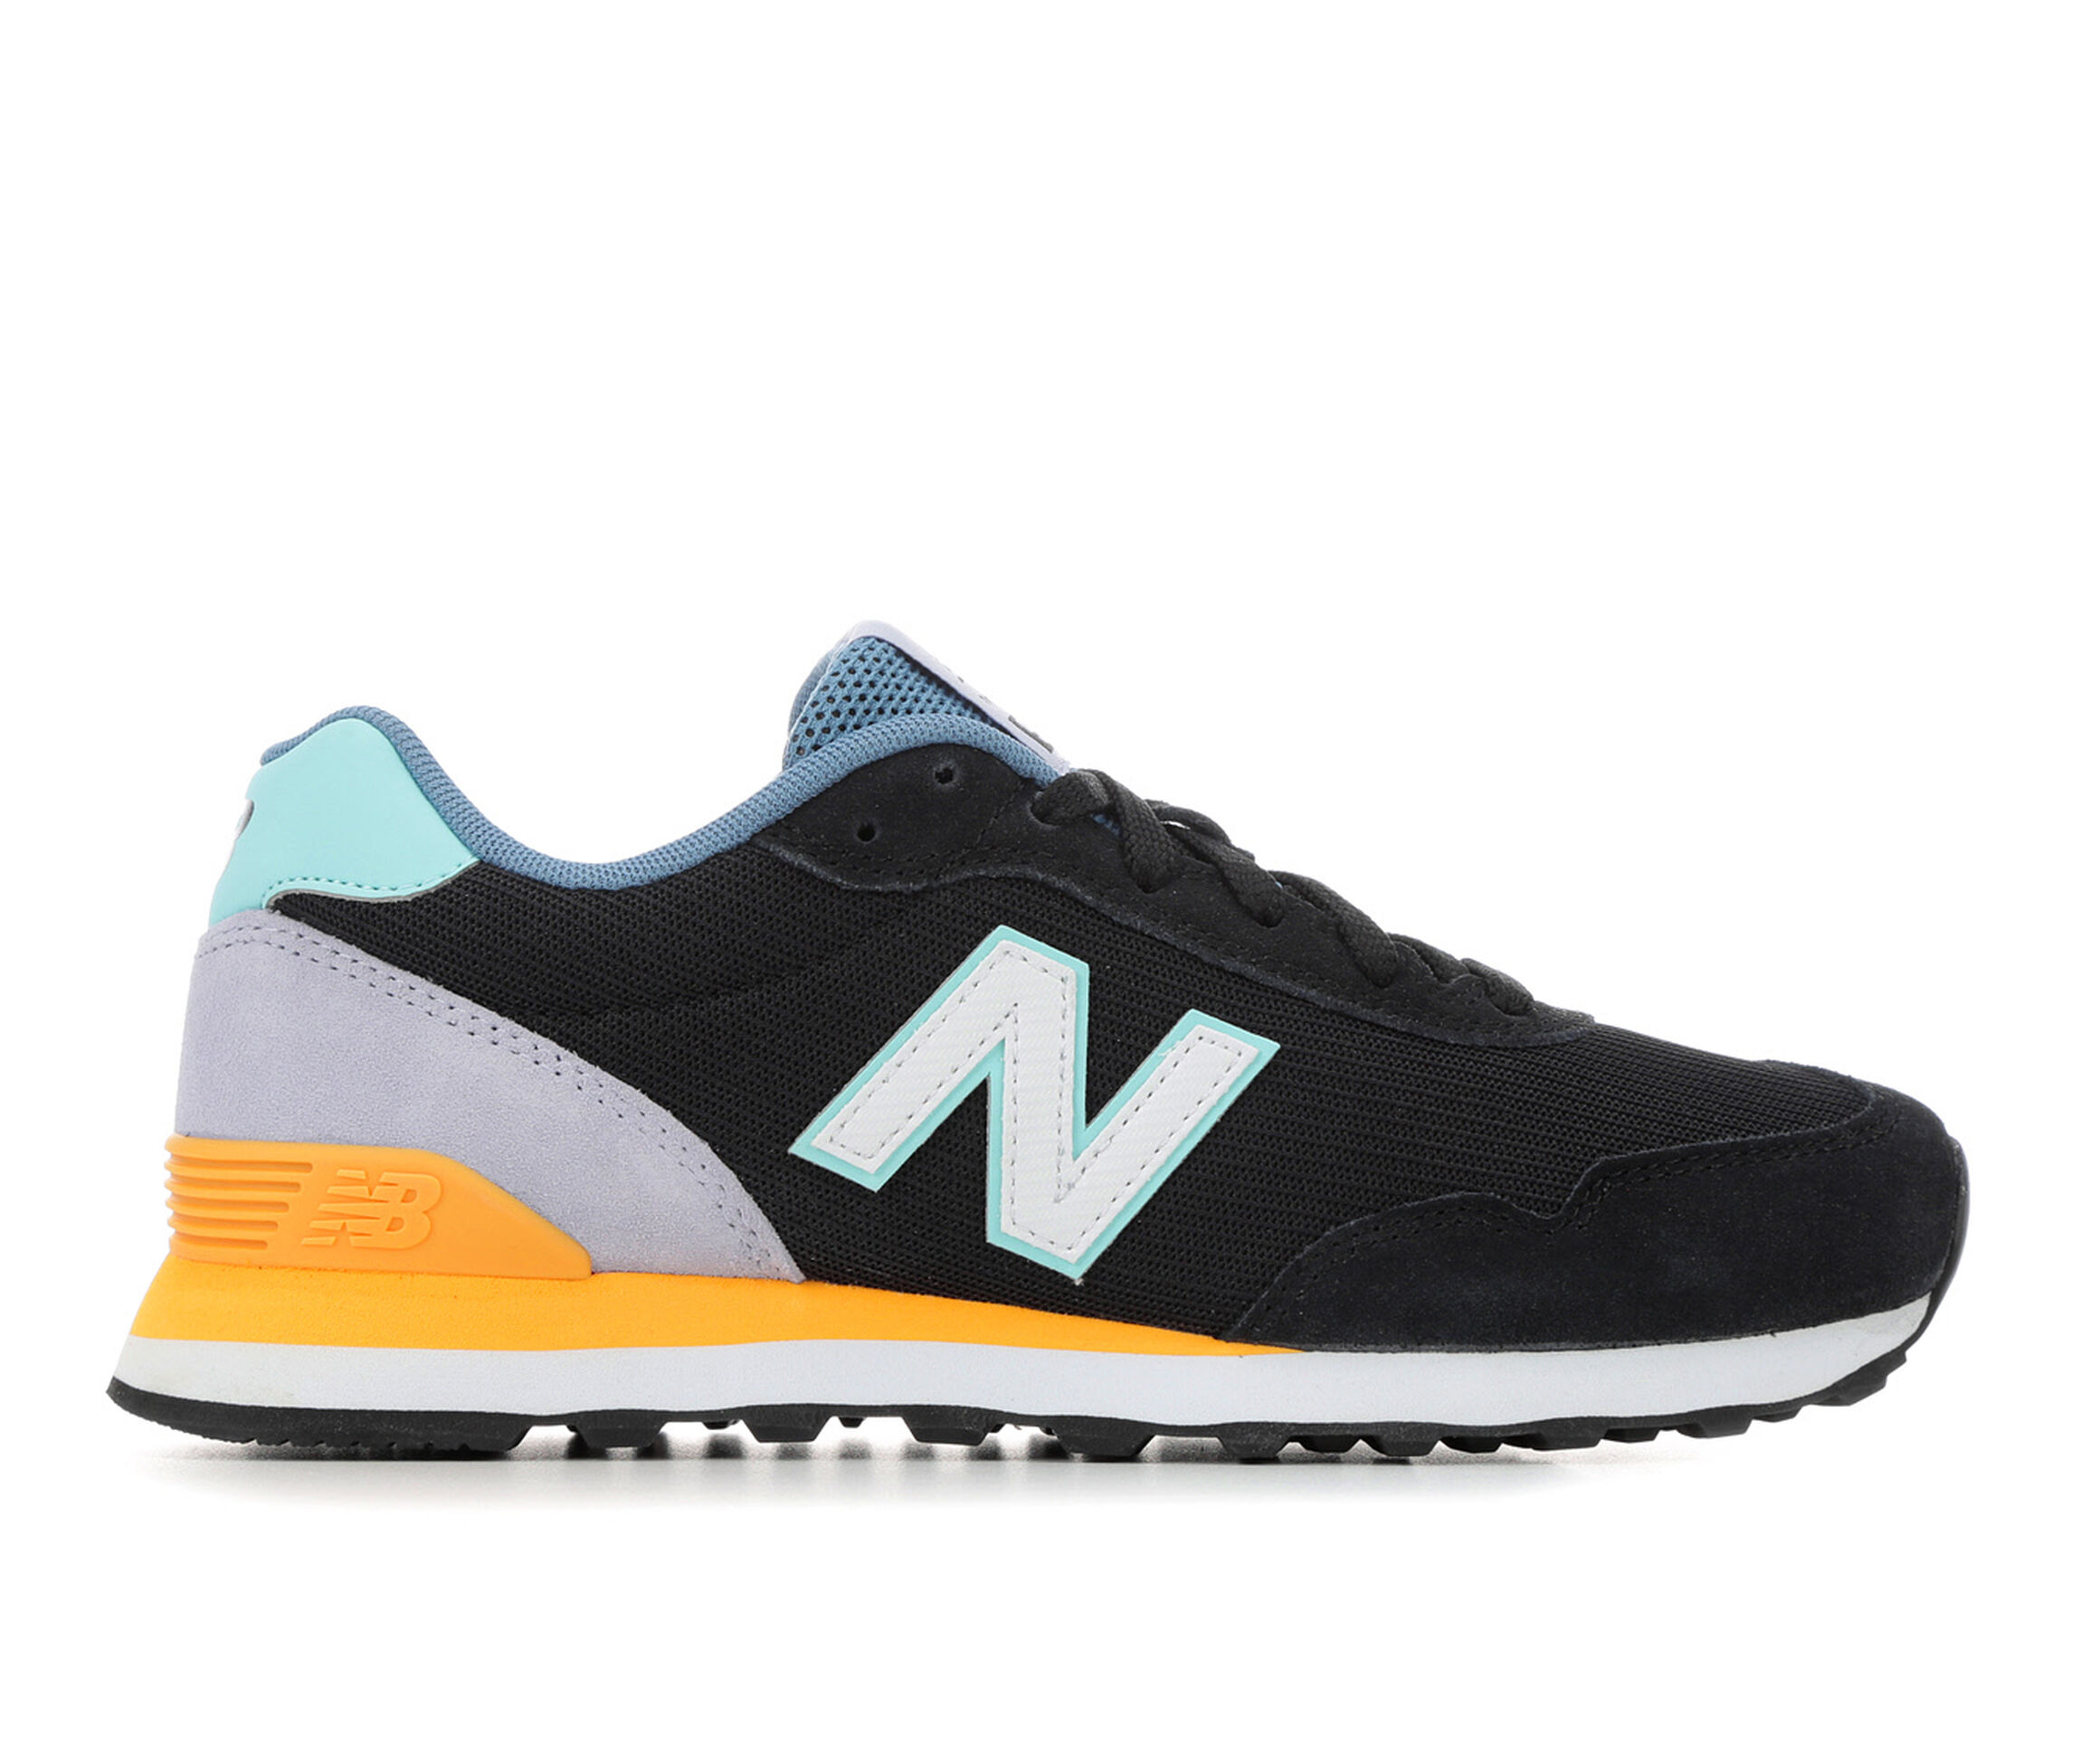 New Balance Sale | 25% Off Select Styles | Shoe Carnival